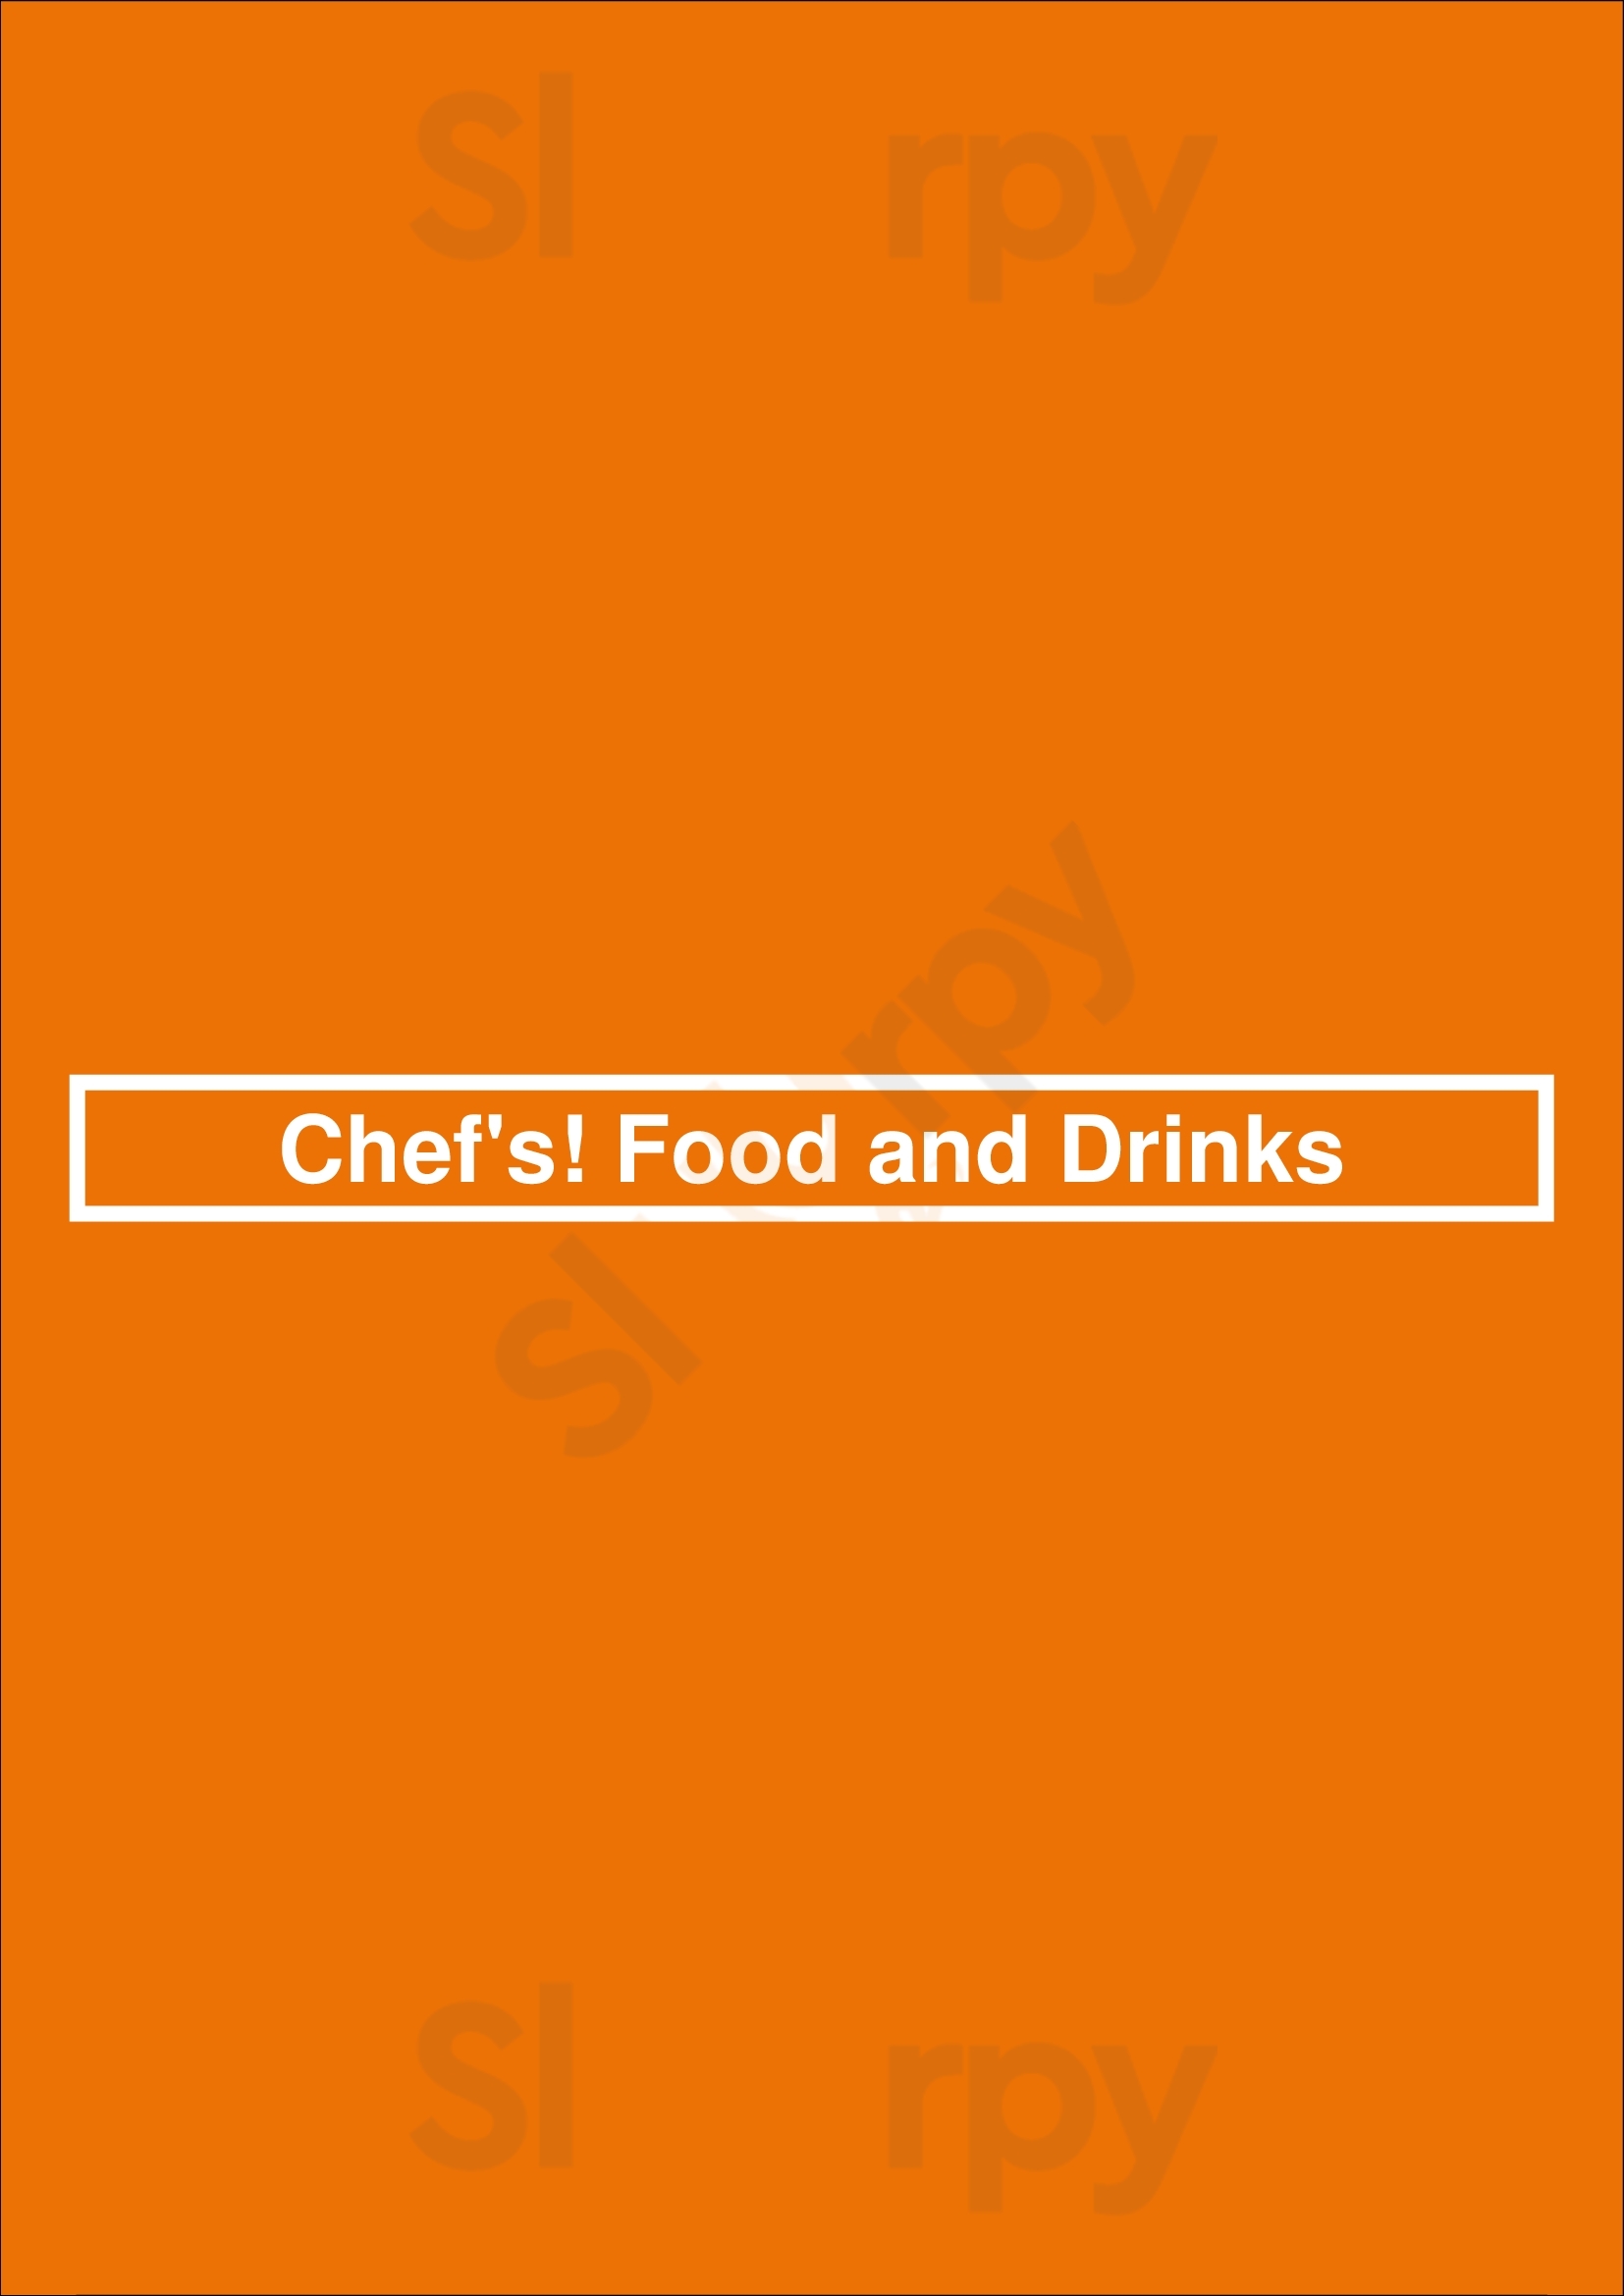 Chef's! Food And Drinks Papendrecht Menu - 1